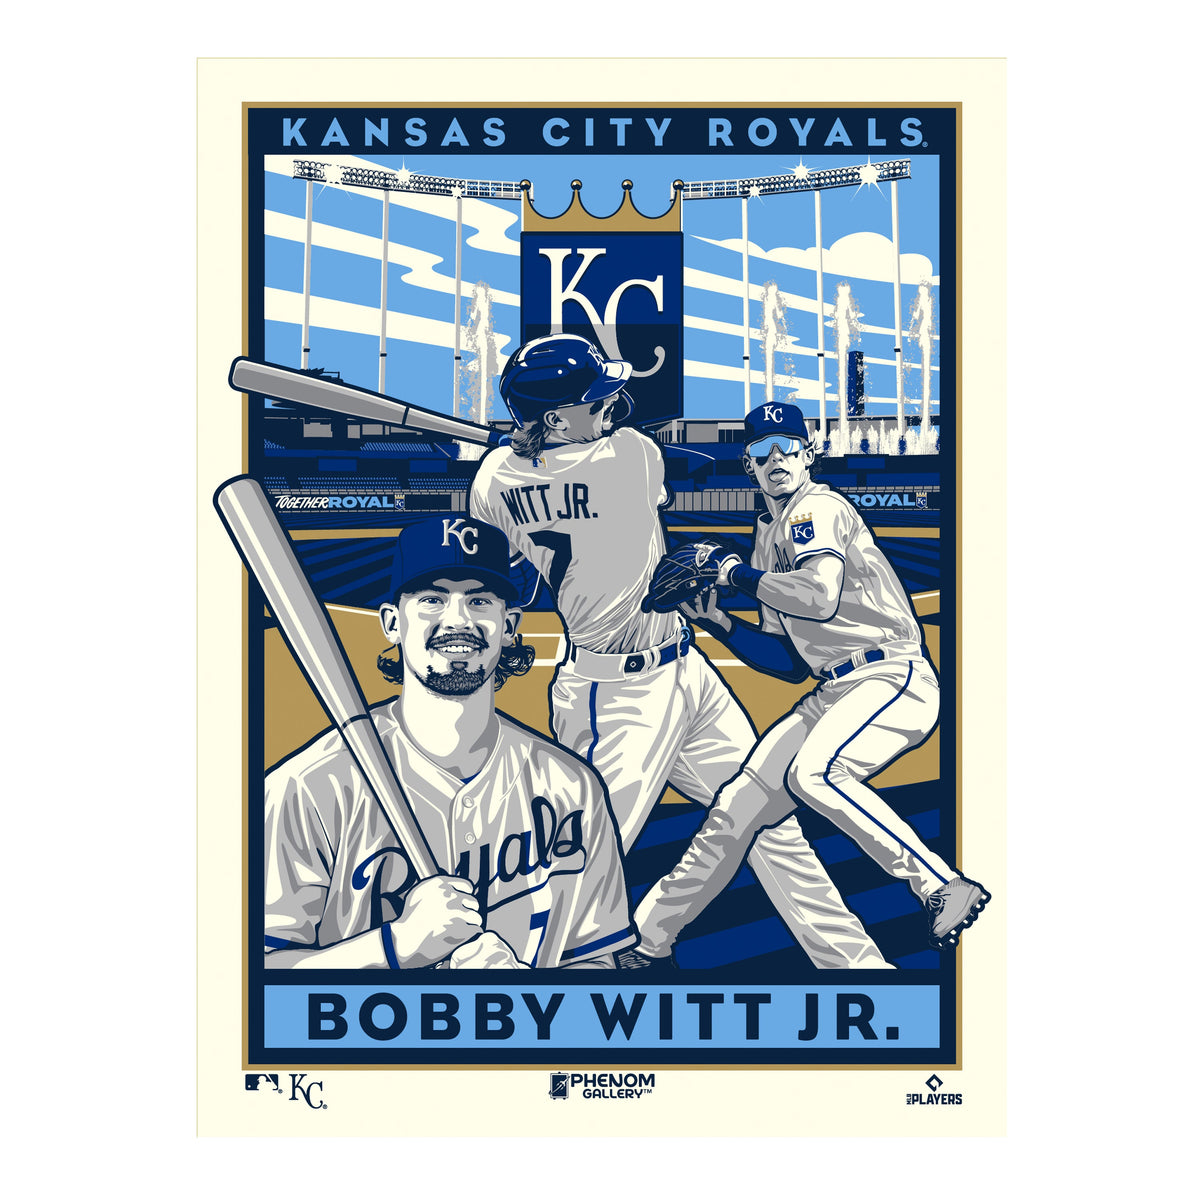 Bobby Witt Jr. Scratched From Lineup as KC Royals Face New York